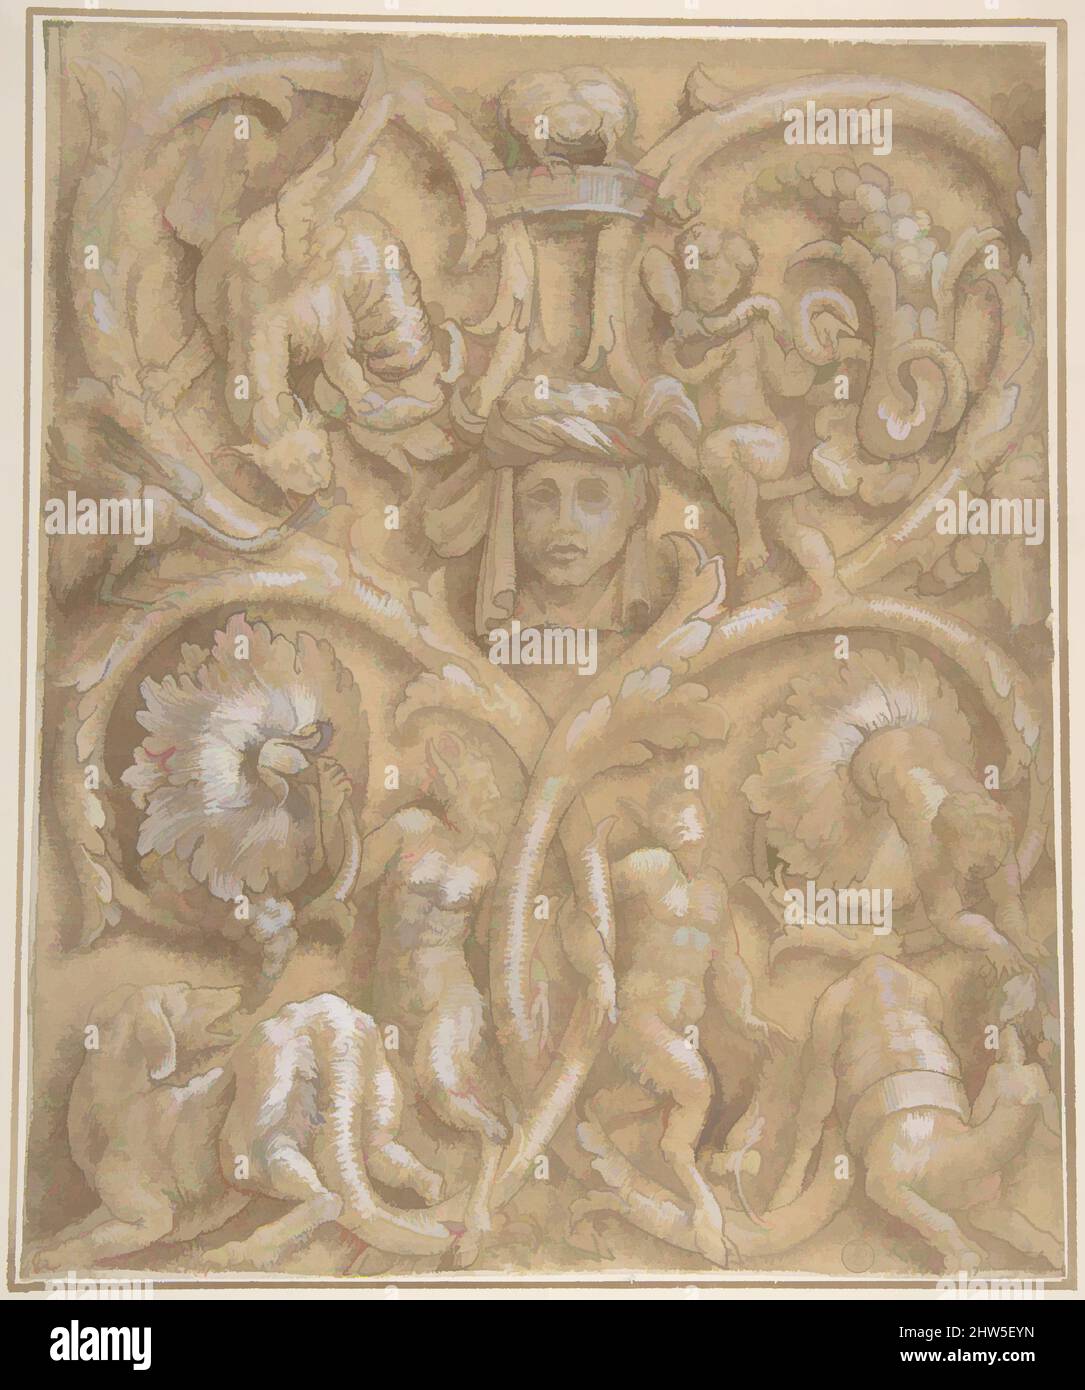 Art inspired by Design for an Ornamental Panel with Rinceaux, Satyrs, Putti, Monsters and a Human Head., 1535–45, Pen and brown ink, brush and brown wash on brown ink washed paper, highlighted with white gouache, Sheet: 10 1/2 x 8 3/4 in. (26.7 x 22.2 cm), Attributed to Giulio Campi (, Classic works modernized by Artotop with a splash of modernity. Shapes, color and value, eye-catching visual impact on art. Emotions through freedom of artworks in a contemporary way. A timeless message pursuing a wildly creative new direction. Artists turning to the digital medium and creating the Artotop NFT Stock Photo